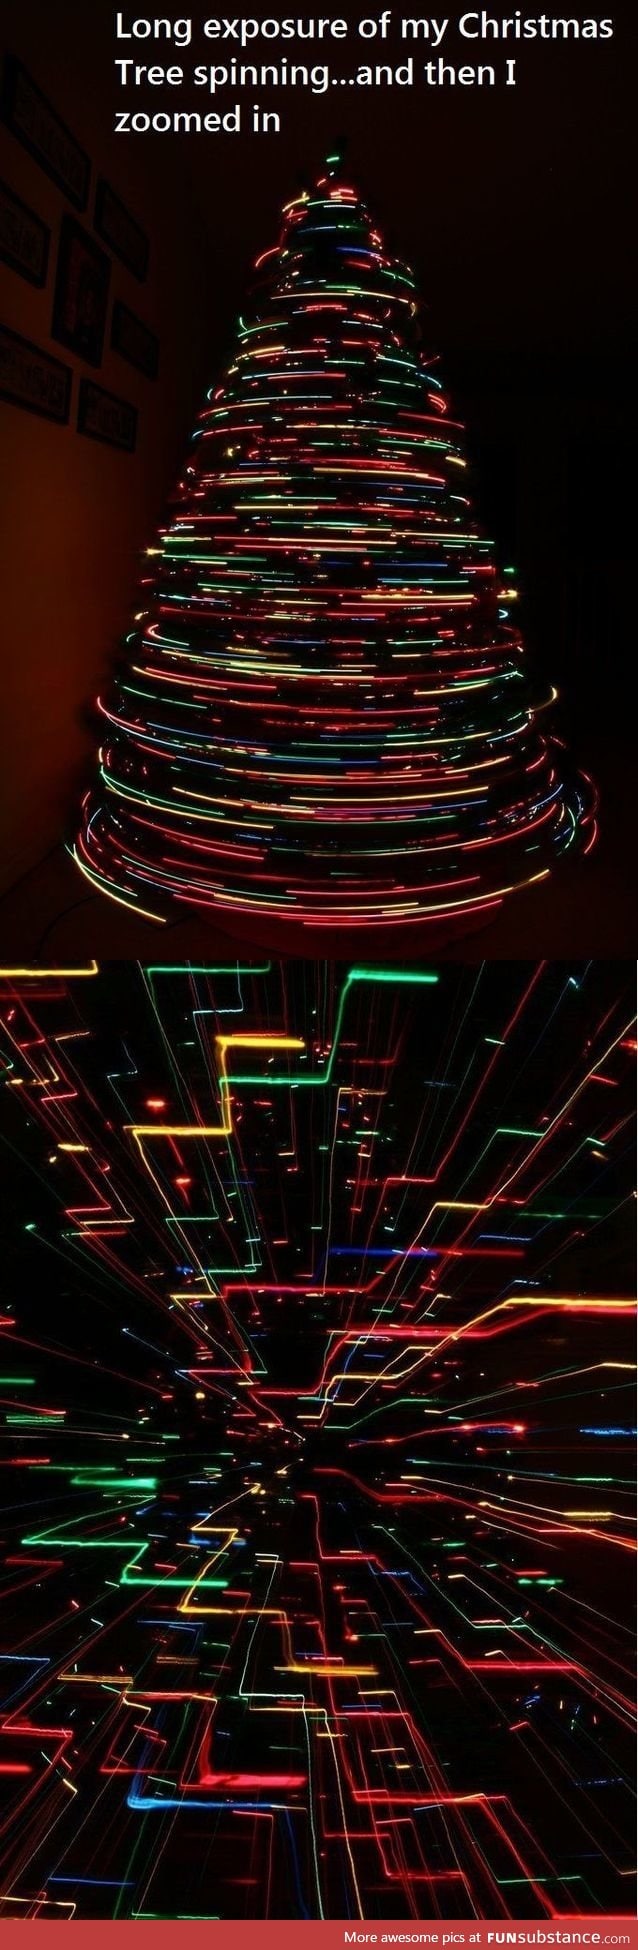 TRON effect with Christmas tree